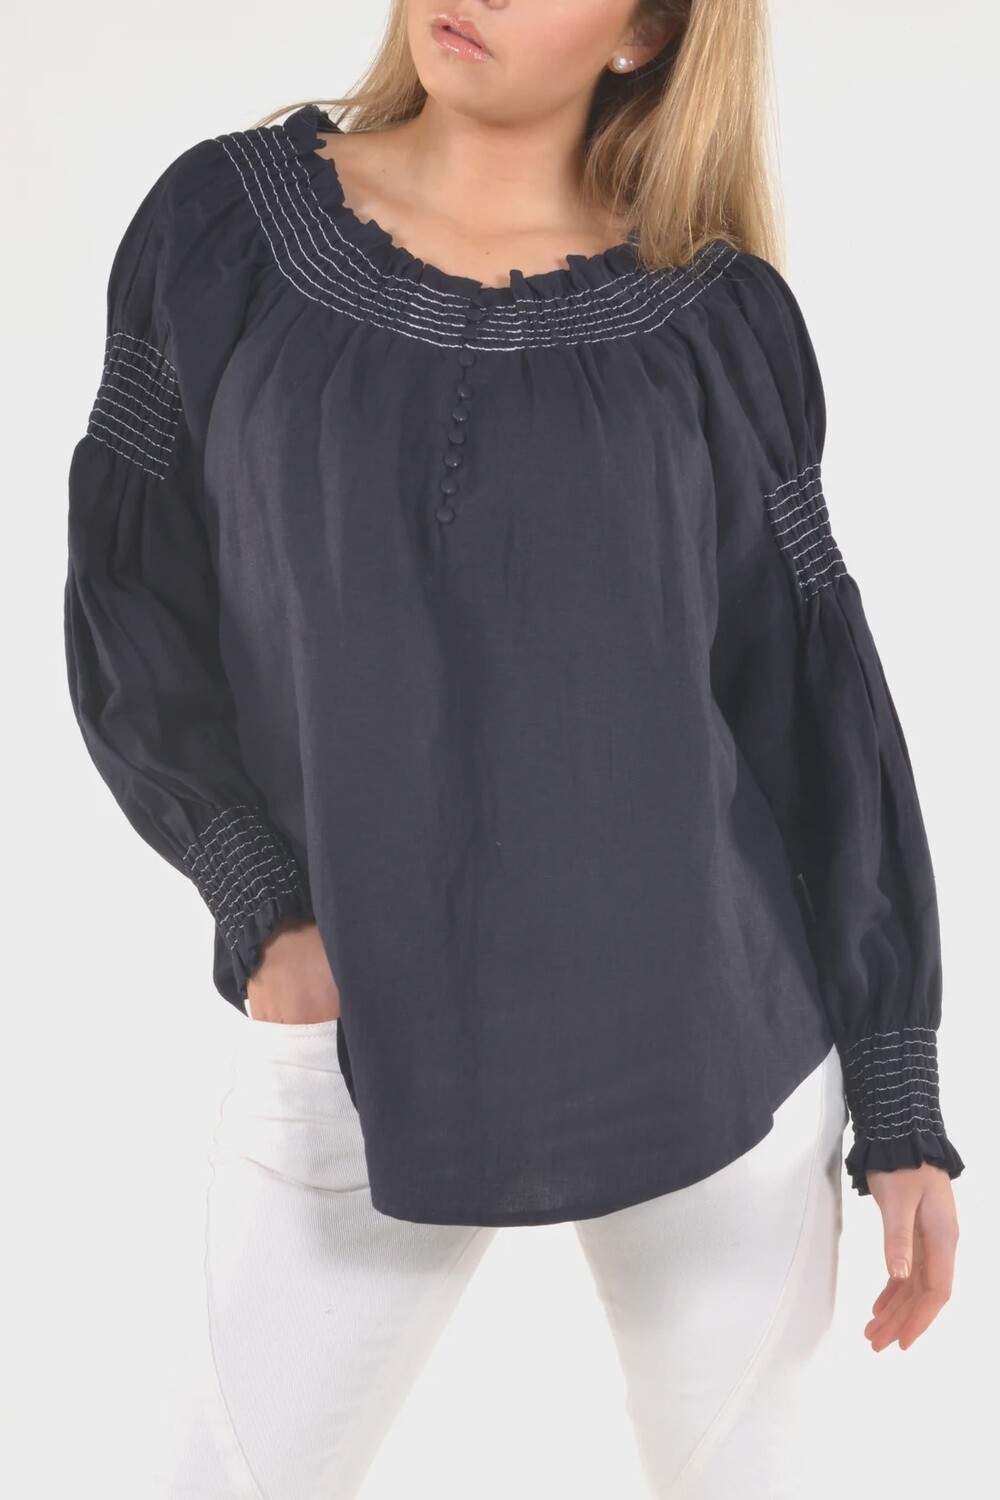 Bullrush Moonta Bay Top navy with white stitching, Size: XS